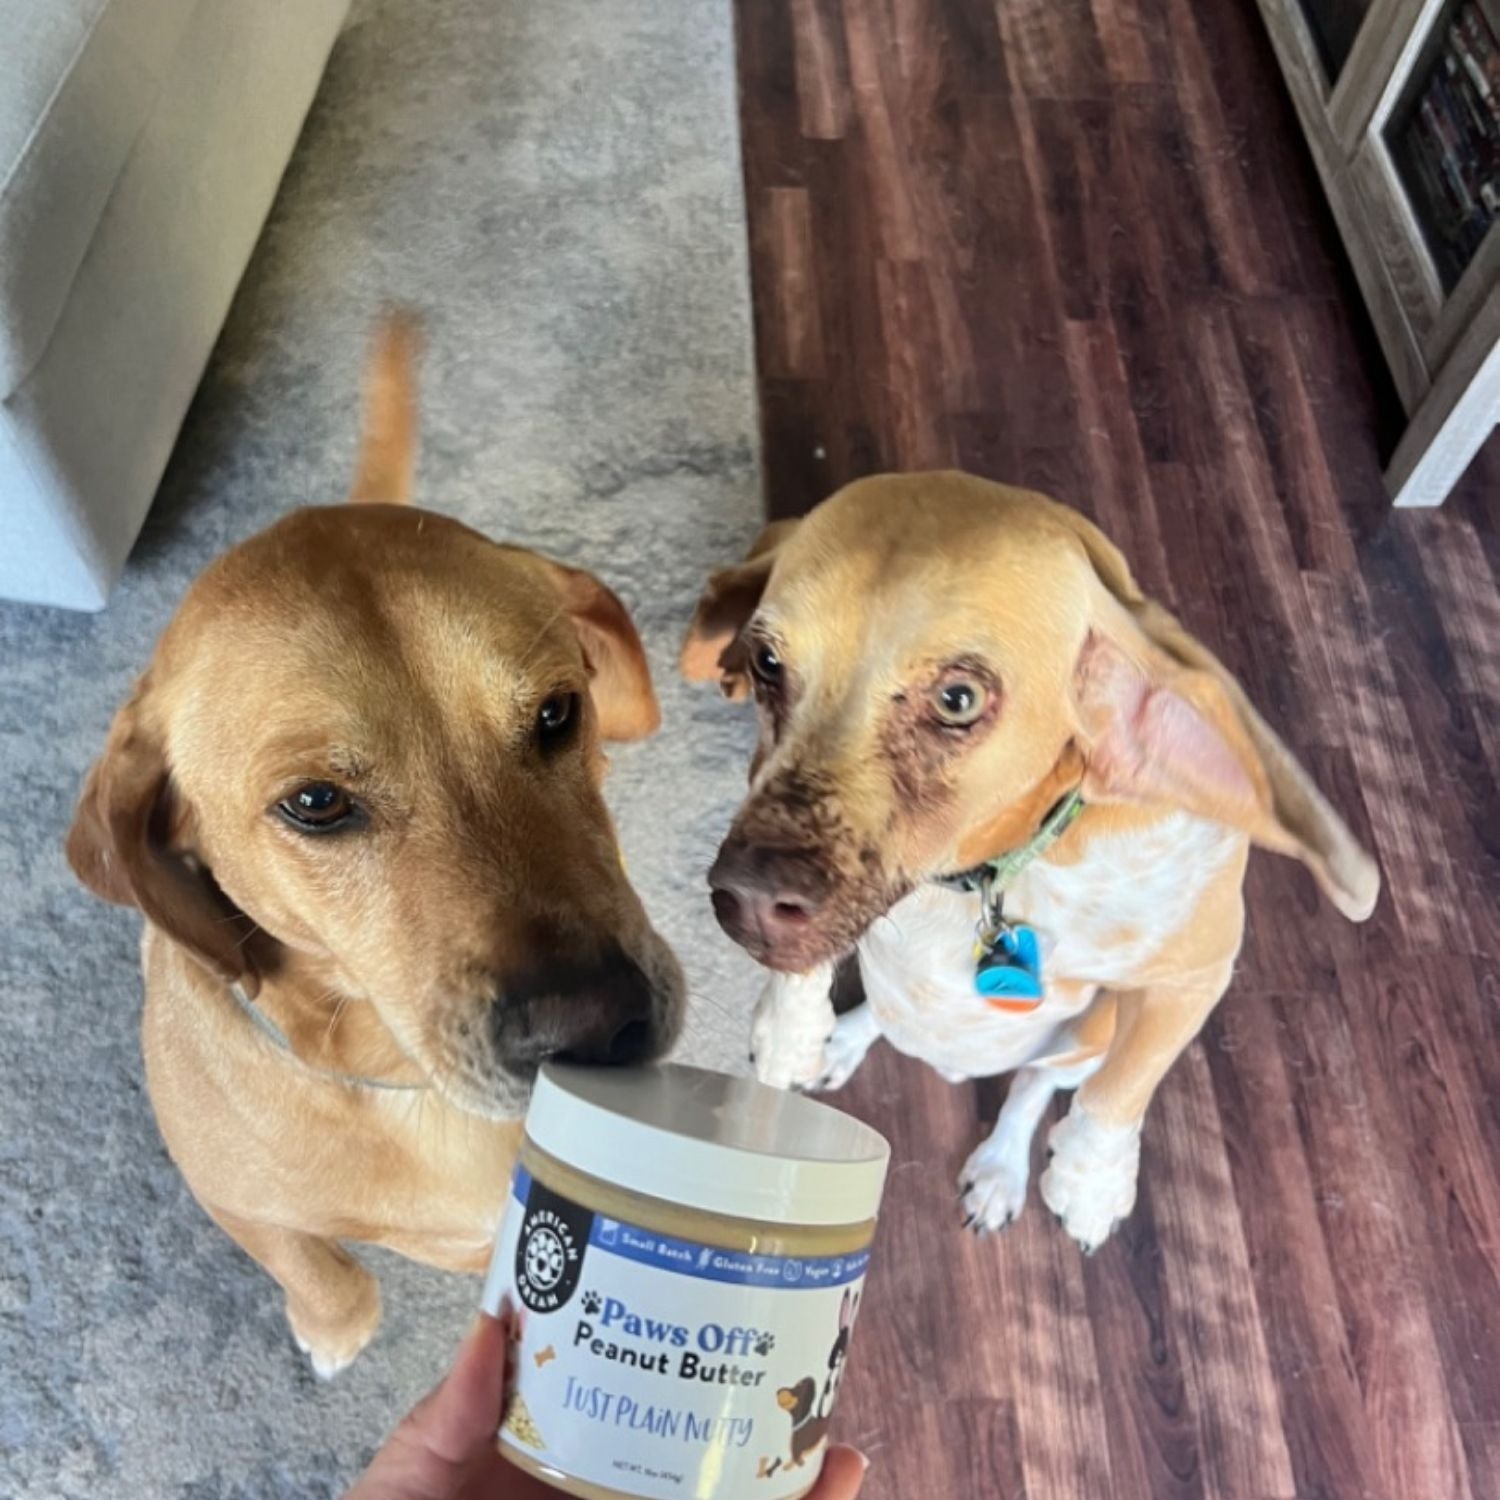 Gluten-Free Paws Off Just Plain Nutty Peanut Butter